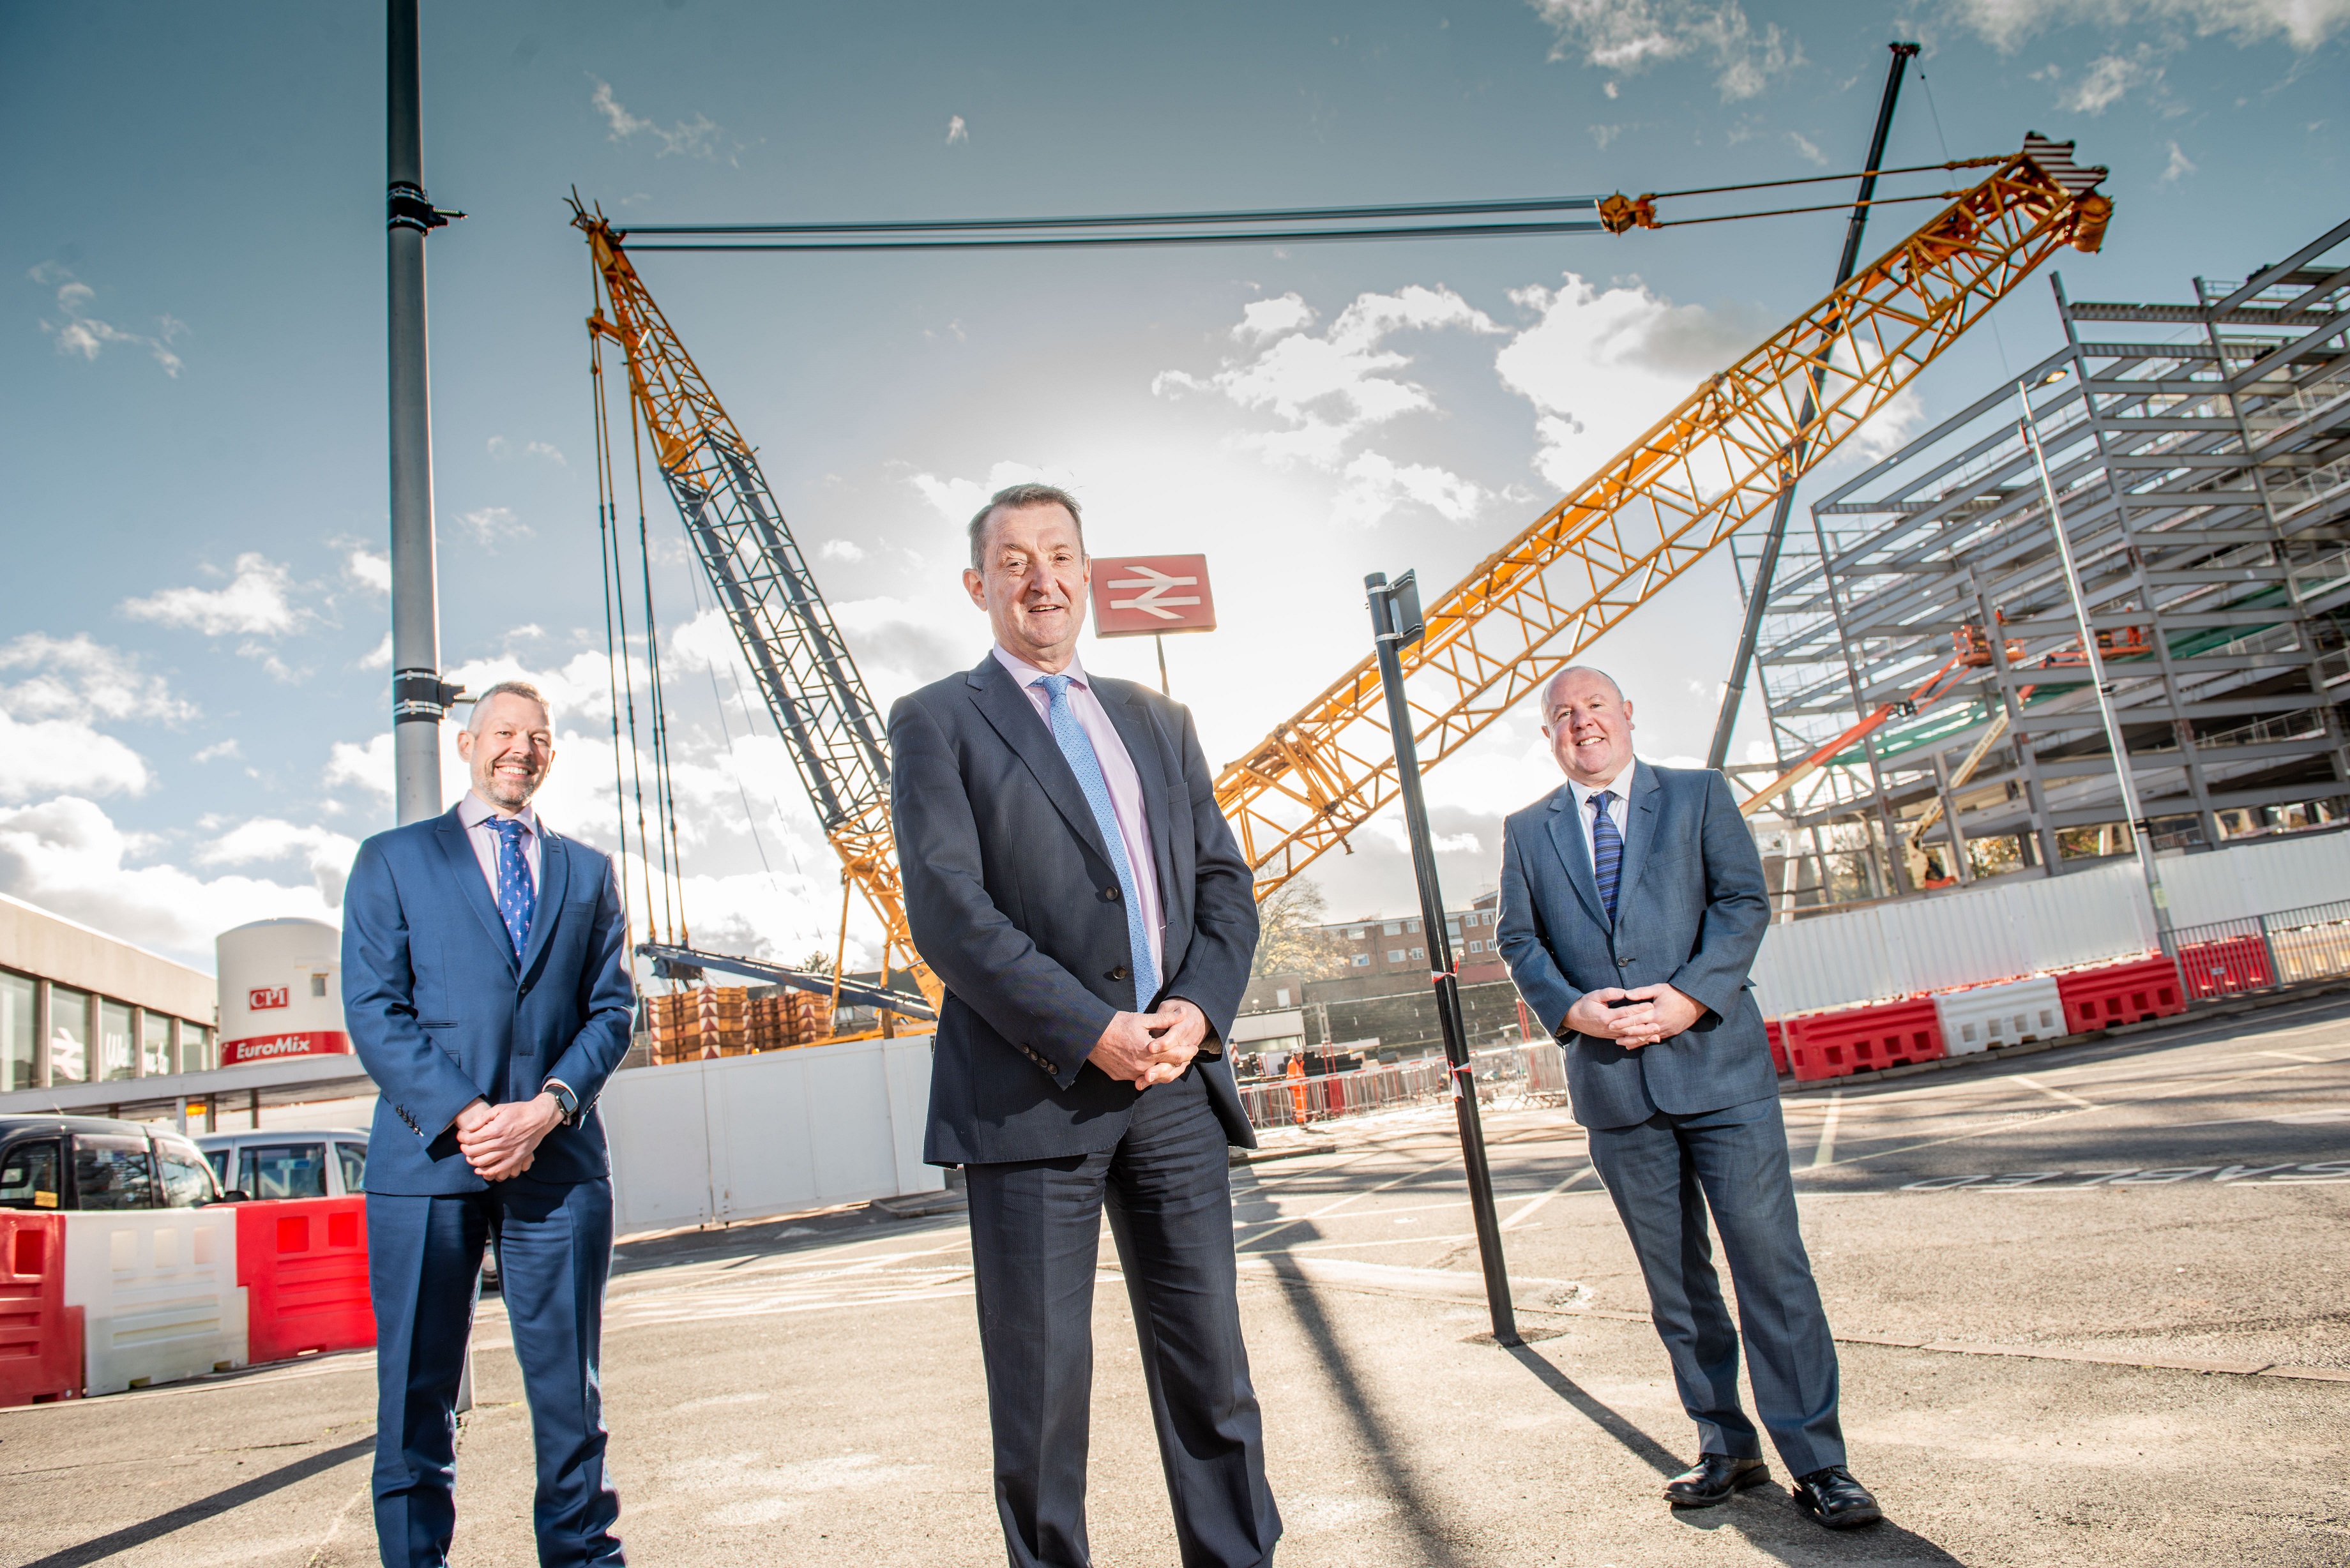 Caption: From the left, Malcolm Holmes (Rail Director for WMCA/Transport for West Midlands), Nick Abell (CWLEP) and Cllr Jim O’Boyle (Coventry City Council)